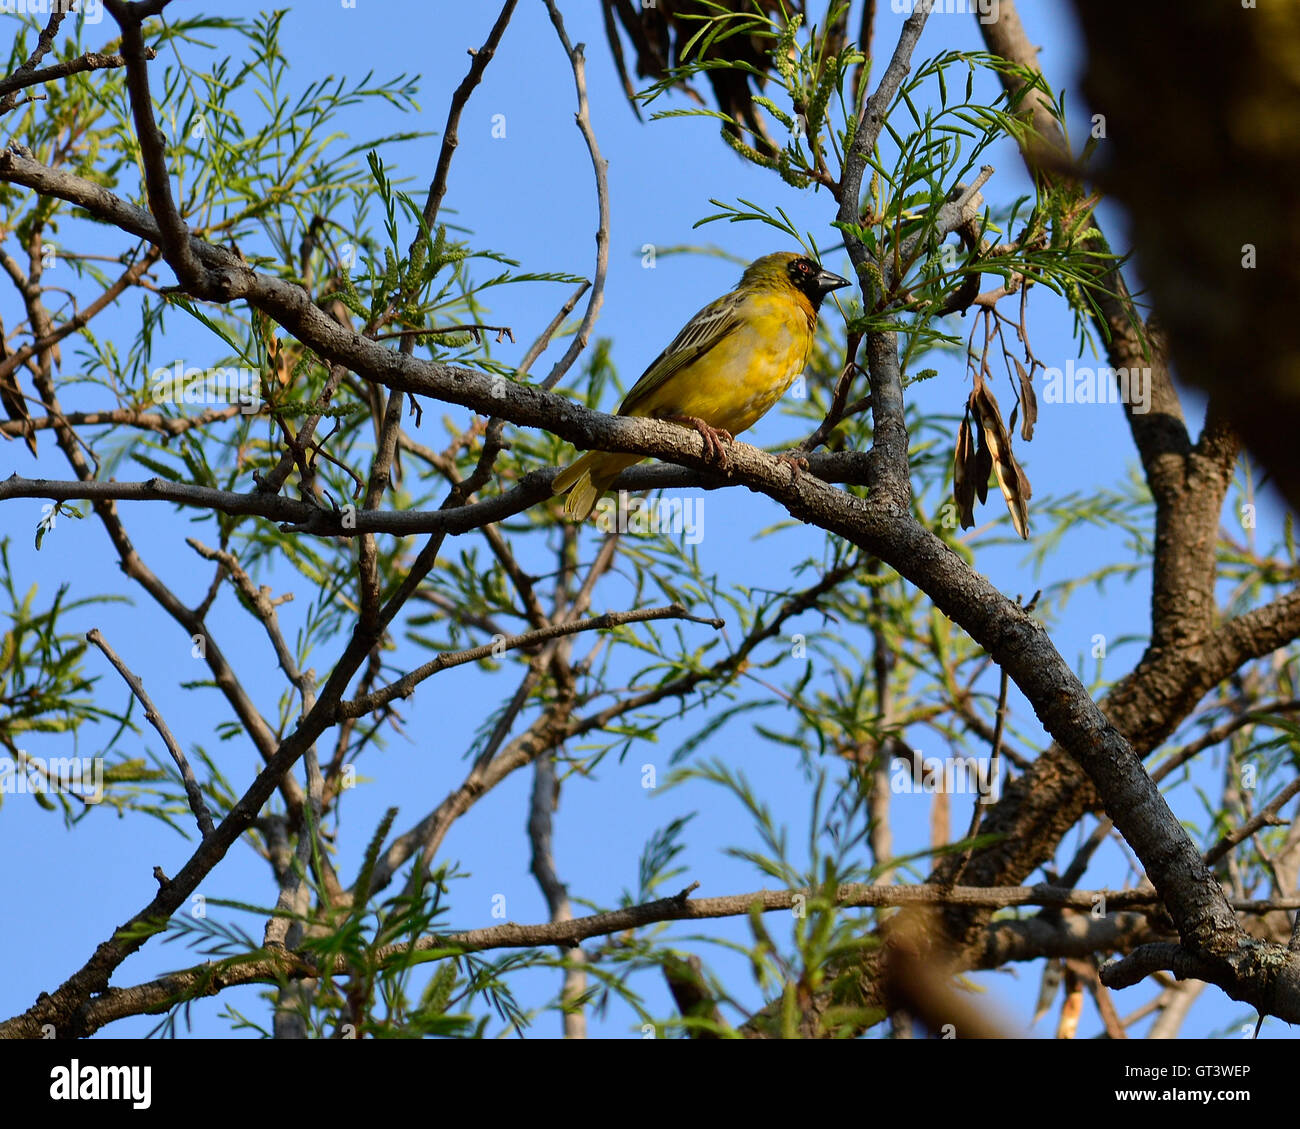 Southern masked weaver (Ploceus velatus). Black faced yellow weaver bird with red eyes against blue sky. Stock Photo